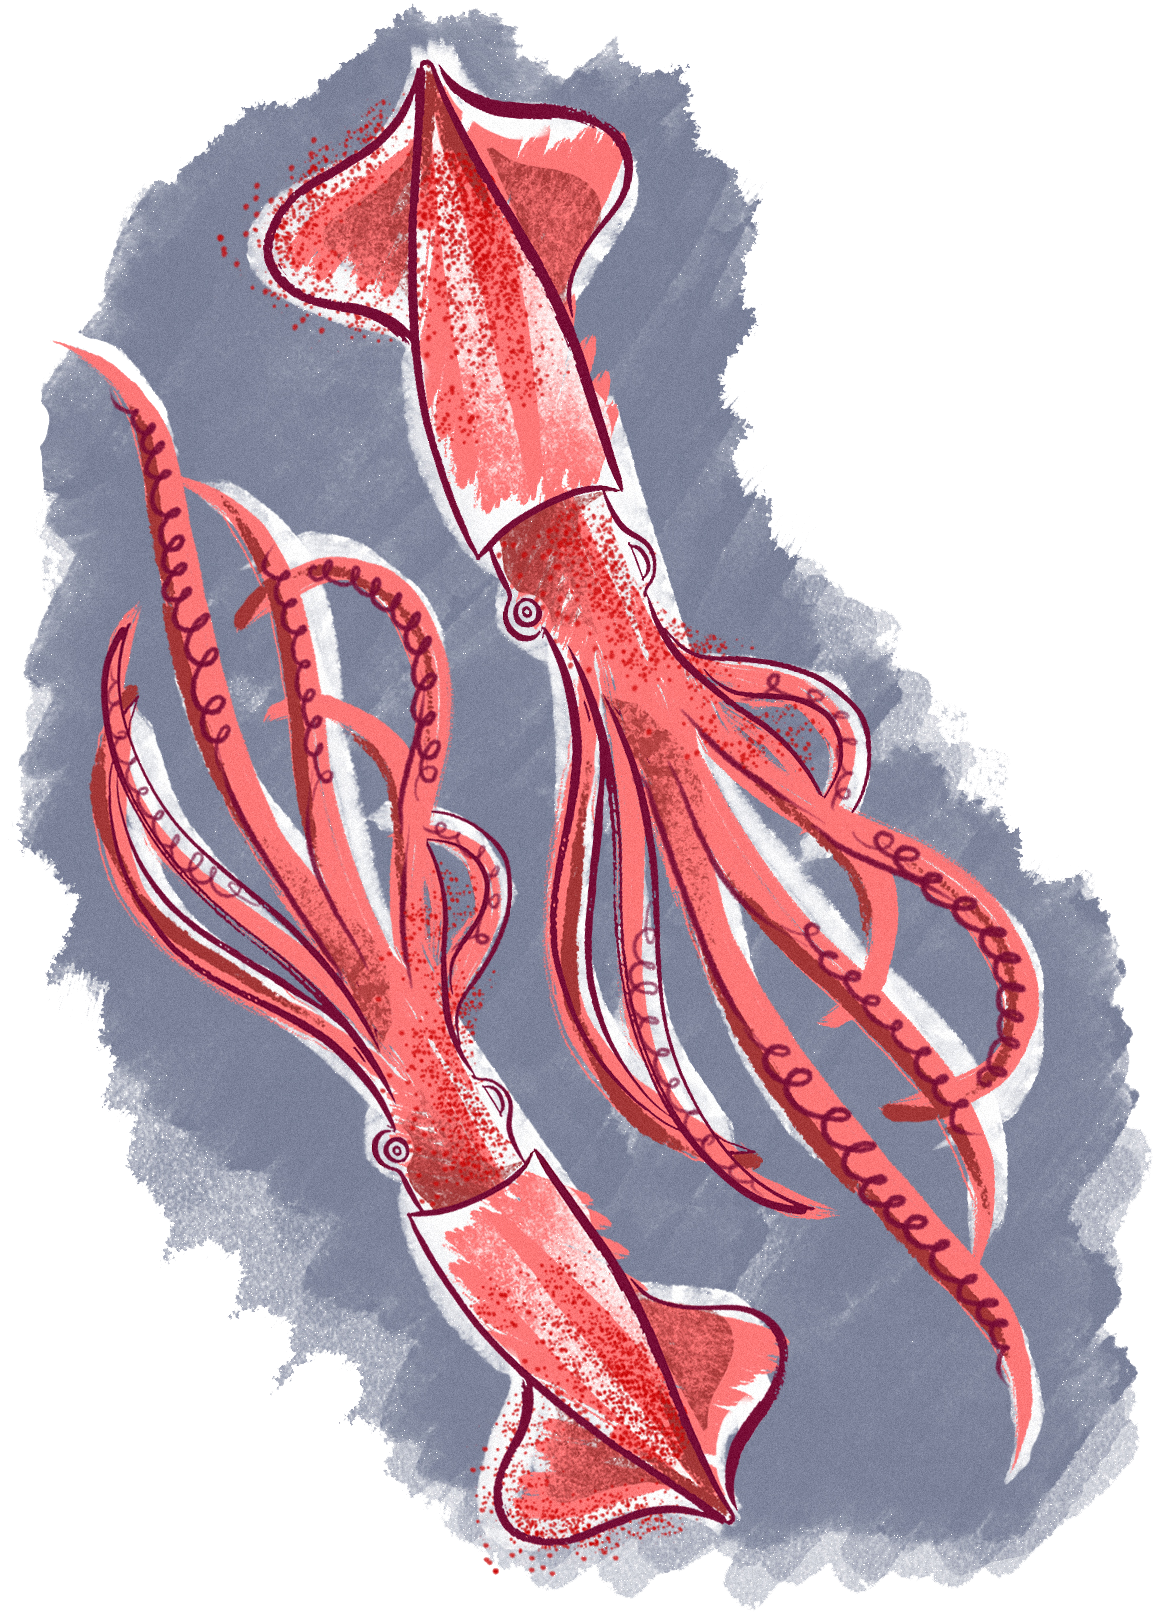 What-I-Ate-Squid-transparent.png